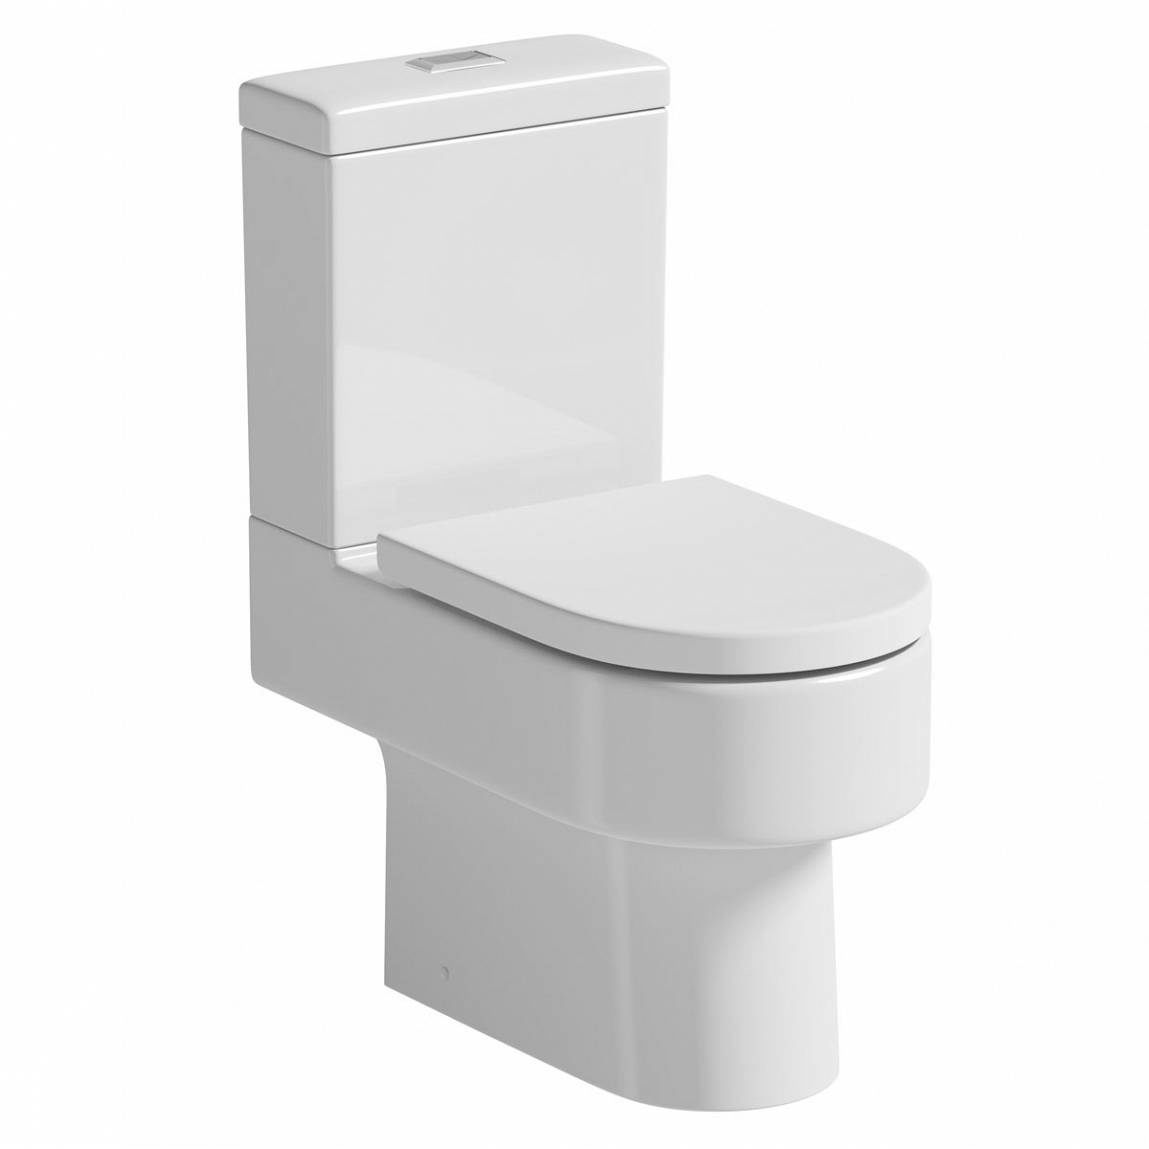 Orchard Dee close coupled toilet with rectangular push button and soft close toilet seat